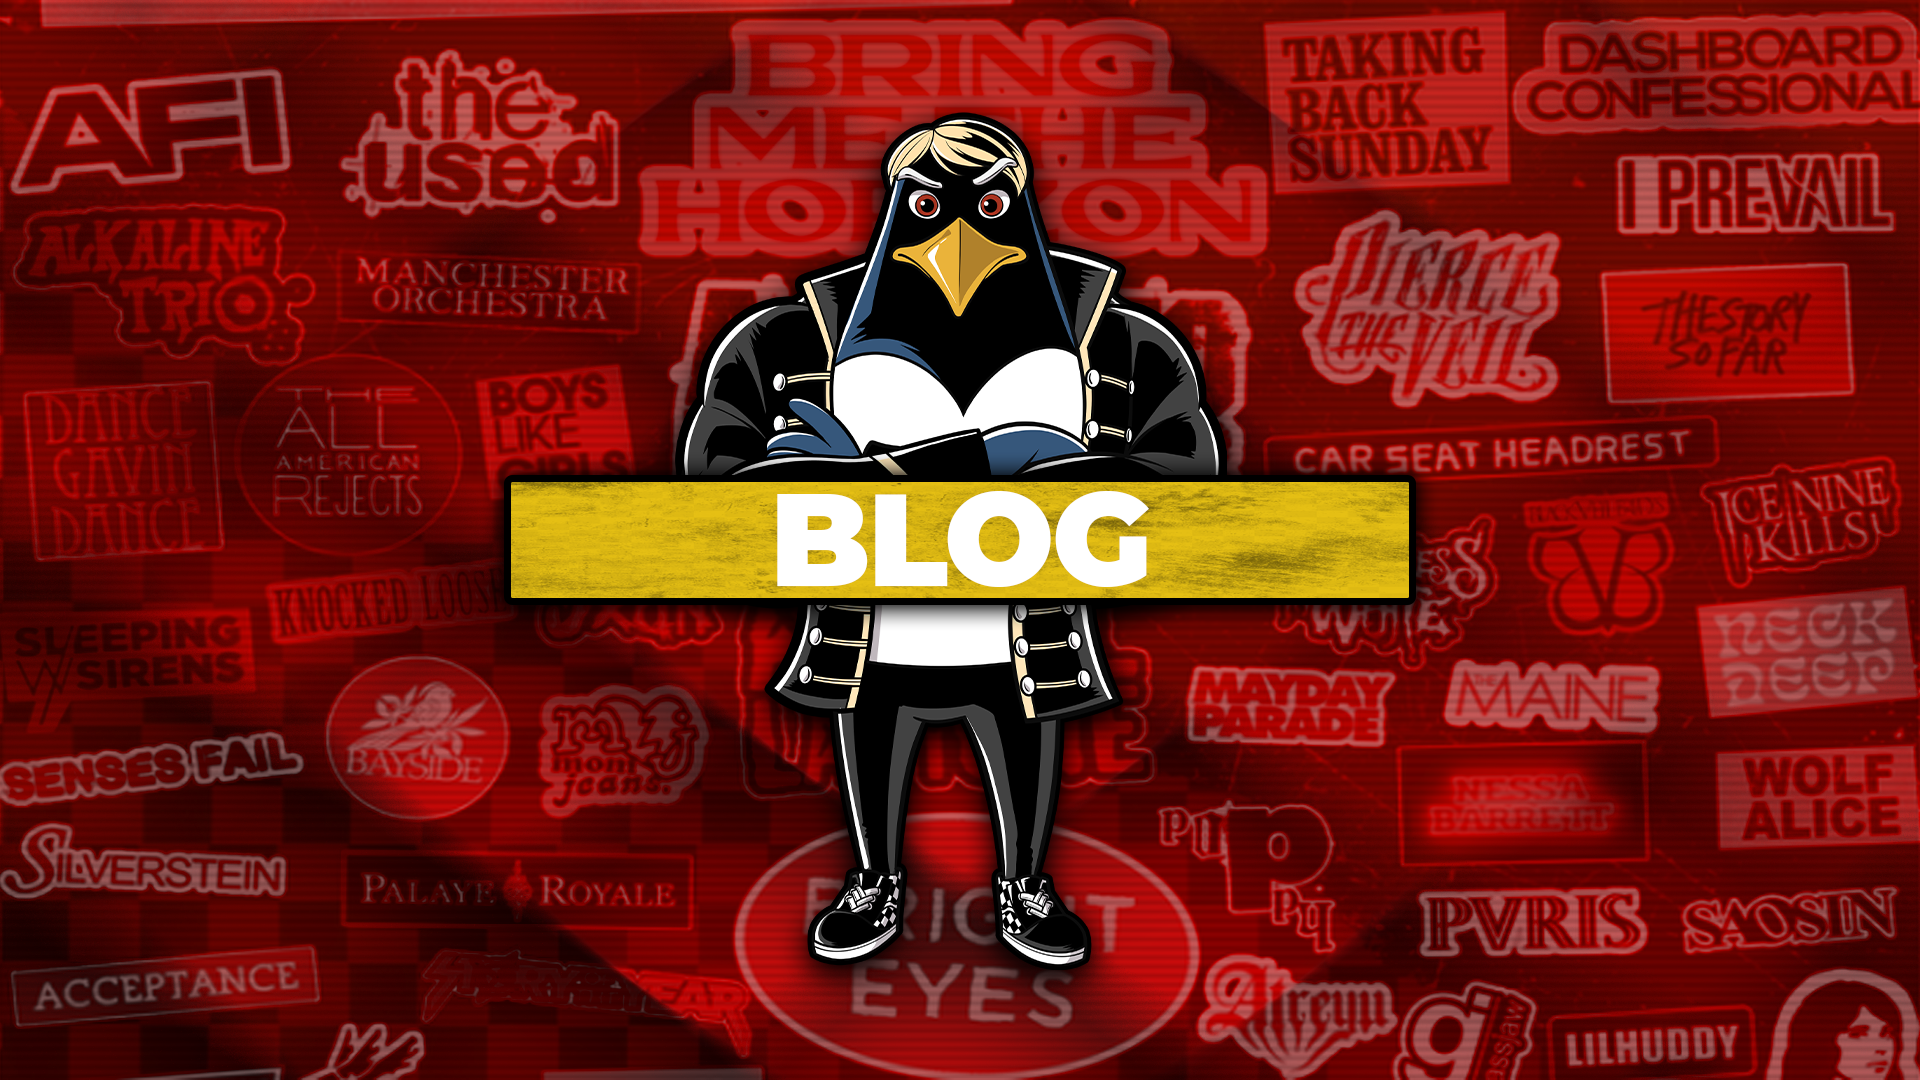 A captivating Emo Night 'BLOG' banner featuring a cartoon penguin dressed in a punk leather jacket, positioned against a red neon backdrop with names of renowned emo and punk bands such as AFI, The Used, and Dashboard Confessional. The prominent 'BLOG' text in a bold yellow bar suggests a space for updates and discussions about emo music culture and events.